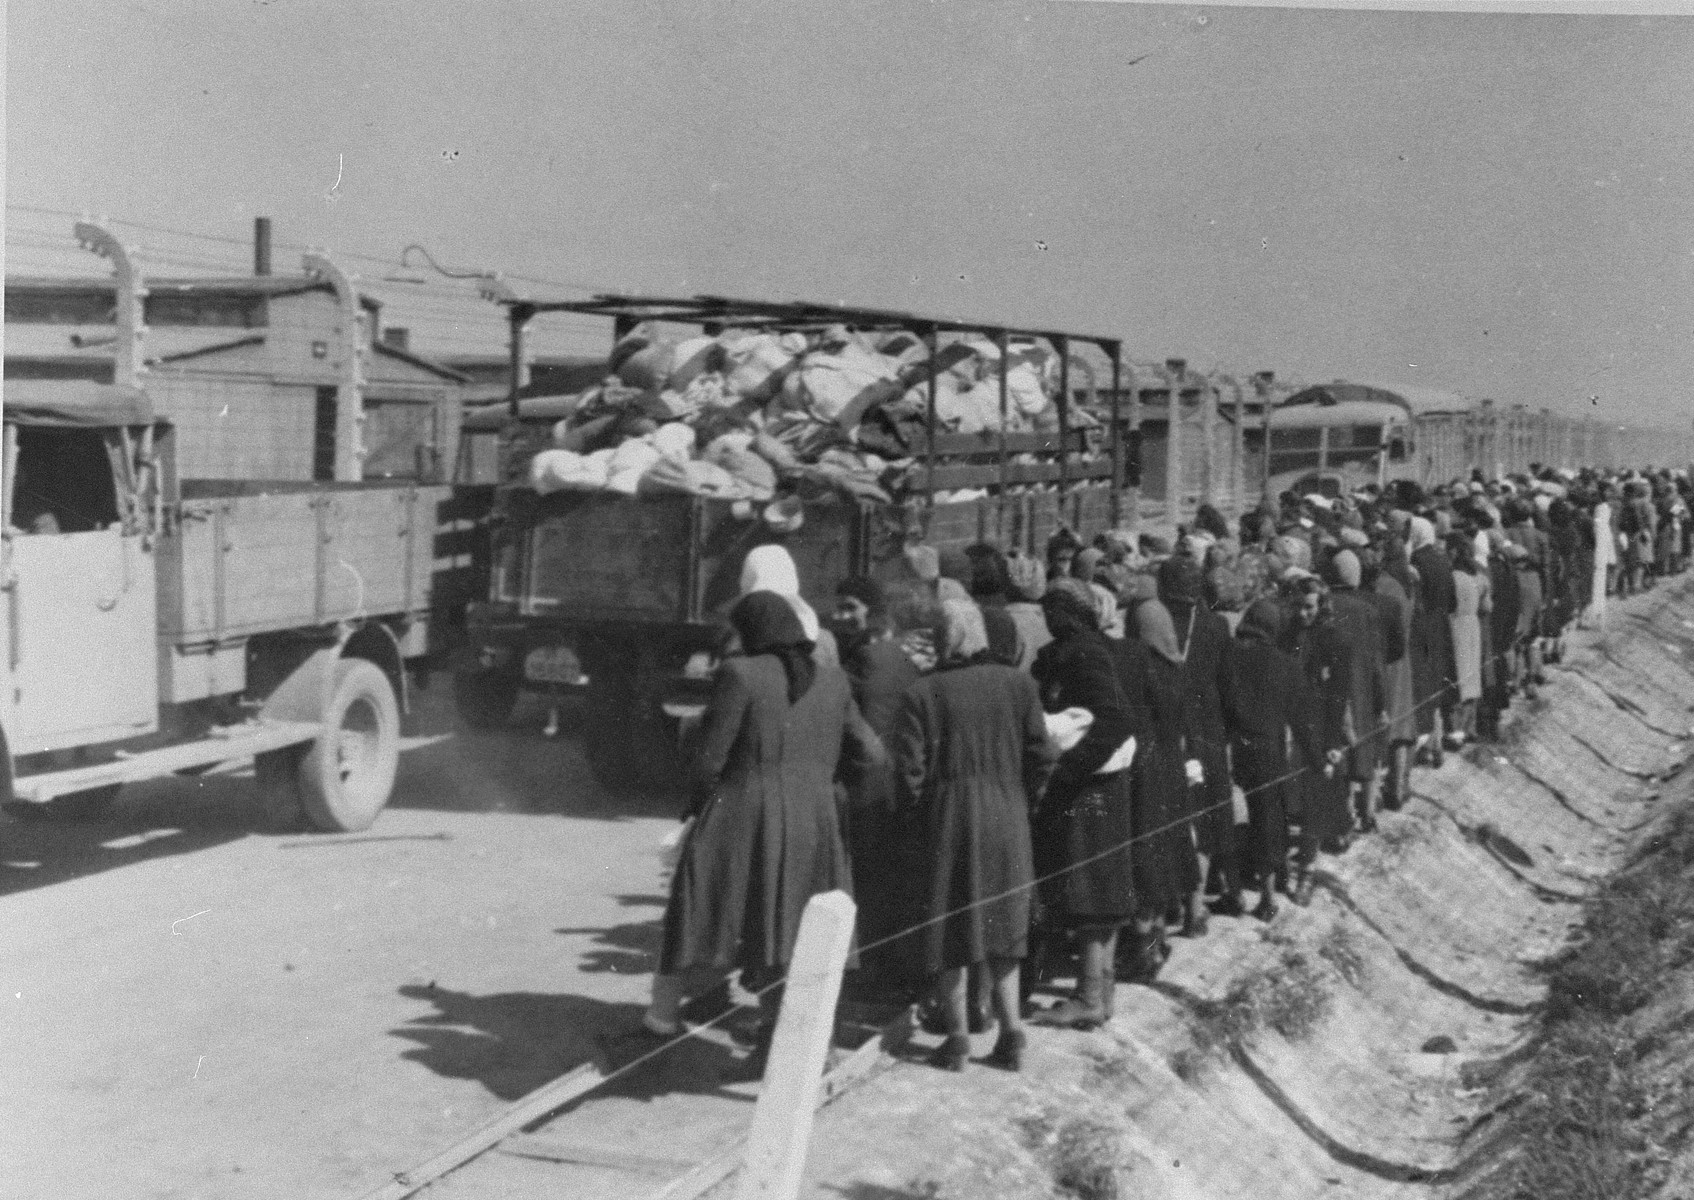 Jewish women and children from Subcarpathian Rus who have been selected for death, watch as trucks loaded with confiscated personal property drive past on their way to the "Kanada" warehouses. 

The camp prisoners came to refer to the looted property as "Kanada," associating it with the riches symbolized by Kanada.  The members of this commando were almost exclusively Jews.  "Kanada" storage facilities occupied several dozen barracks and other buildings around the camp.  The looted property was funneled from Auschwitz through an extensive distribution network that served many individuals and various economic branches of the Third Reich.